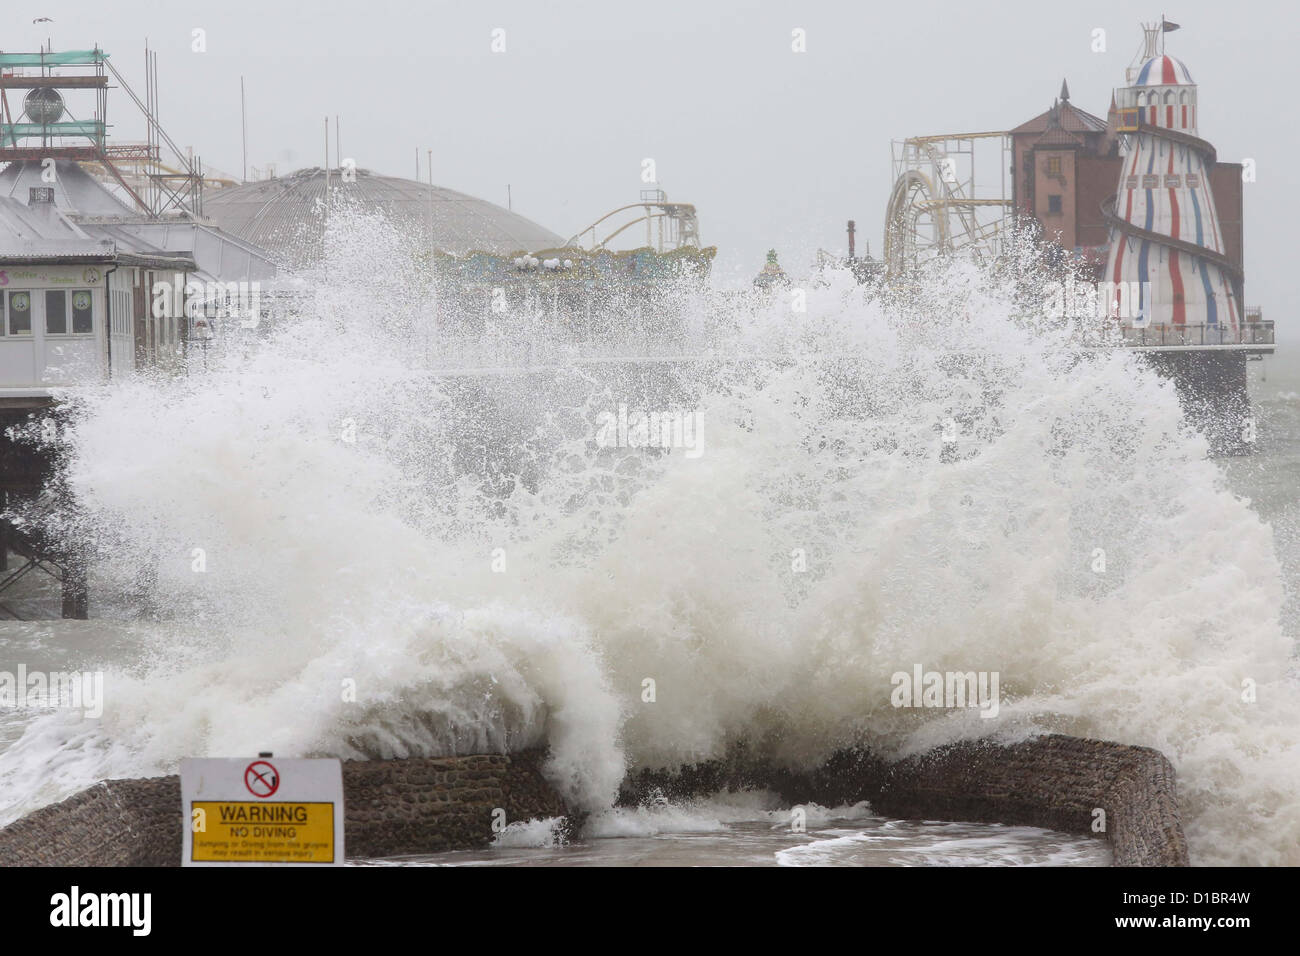 Sea Front Officers close parts of the beach as high winds and seas threaten flooding.in Brighton. Stock Photo